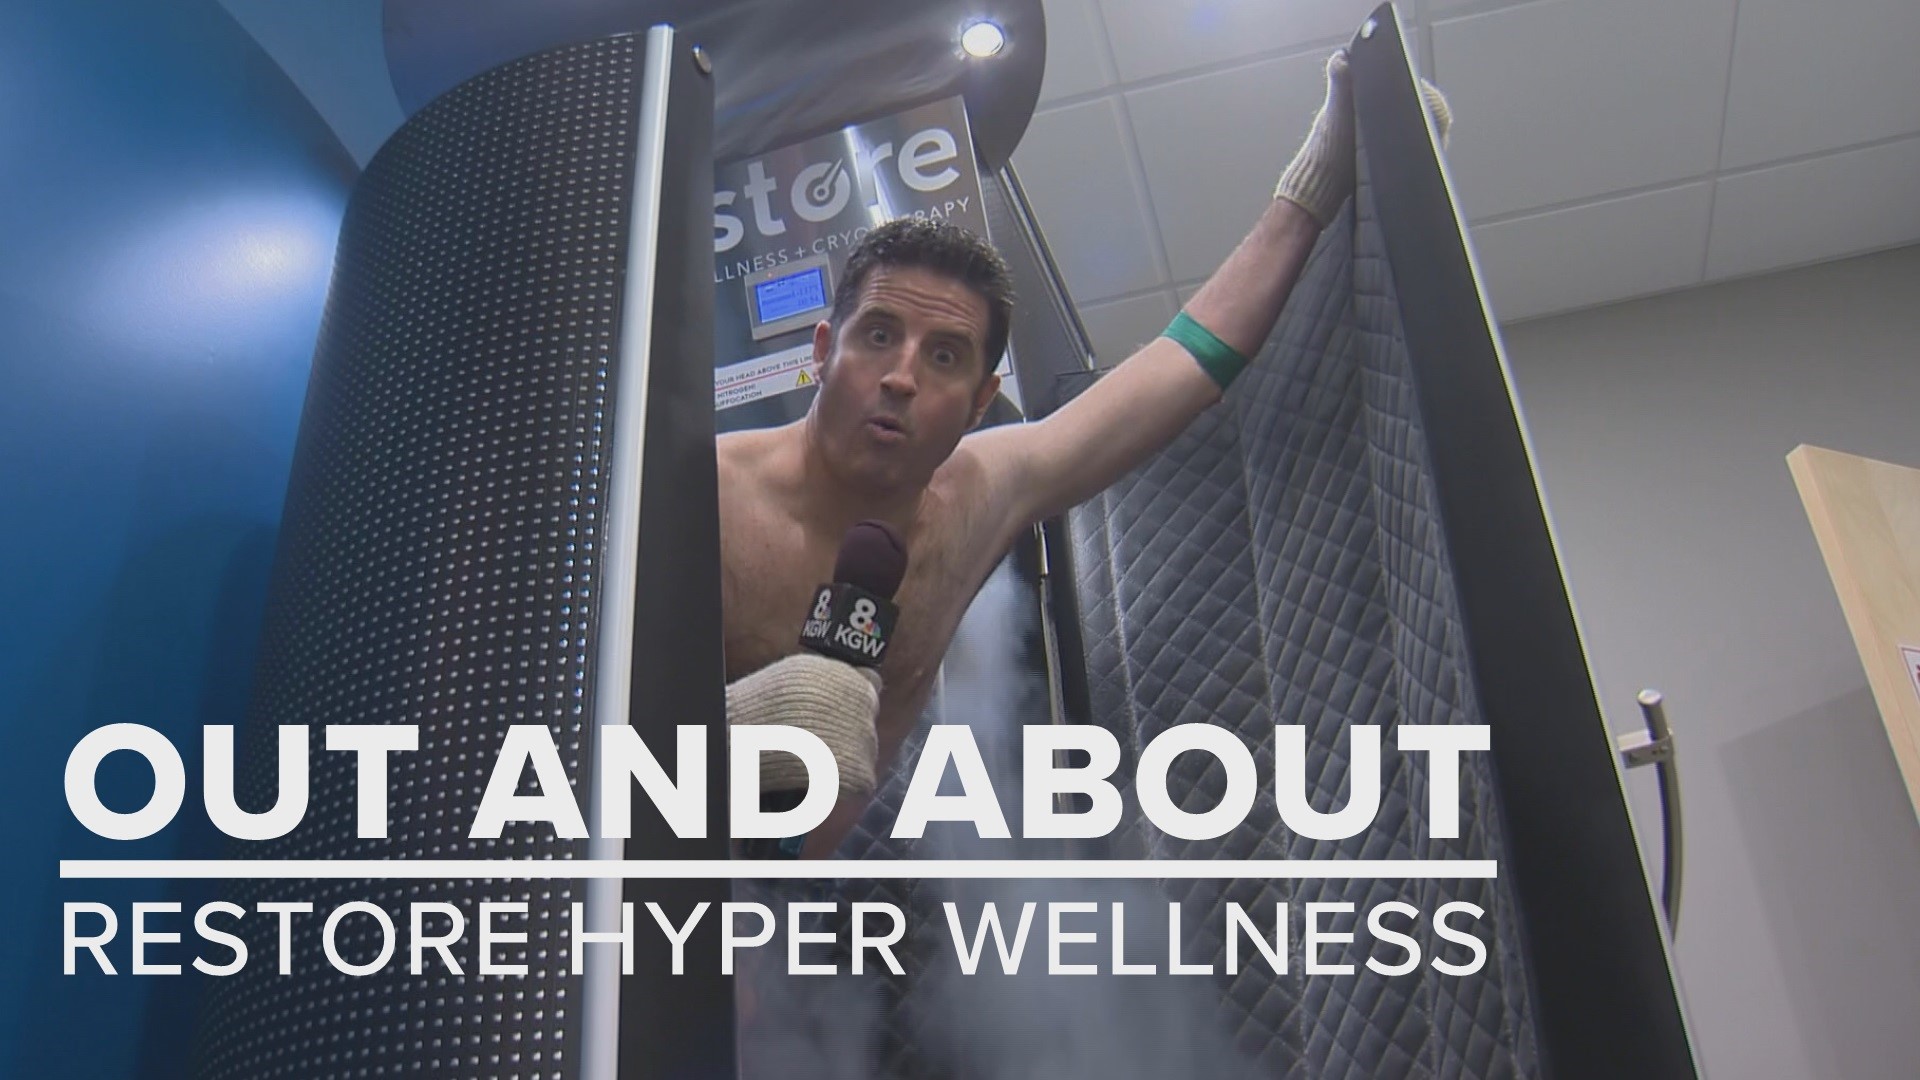 Photobiomodulation and cryotherapy? Drew Carney tries some of the latest health and wellness treatments.